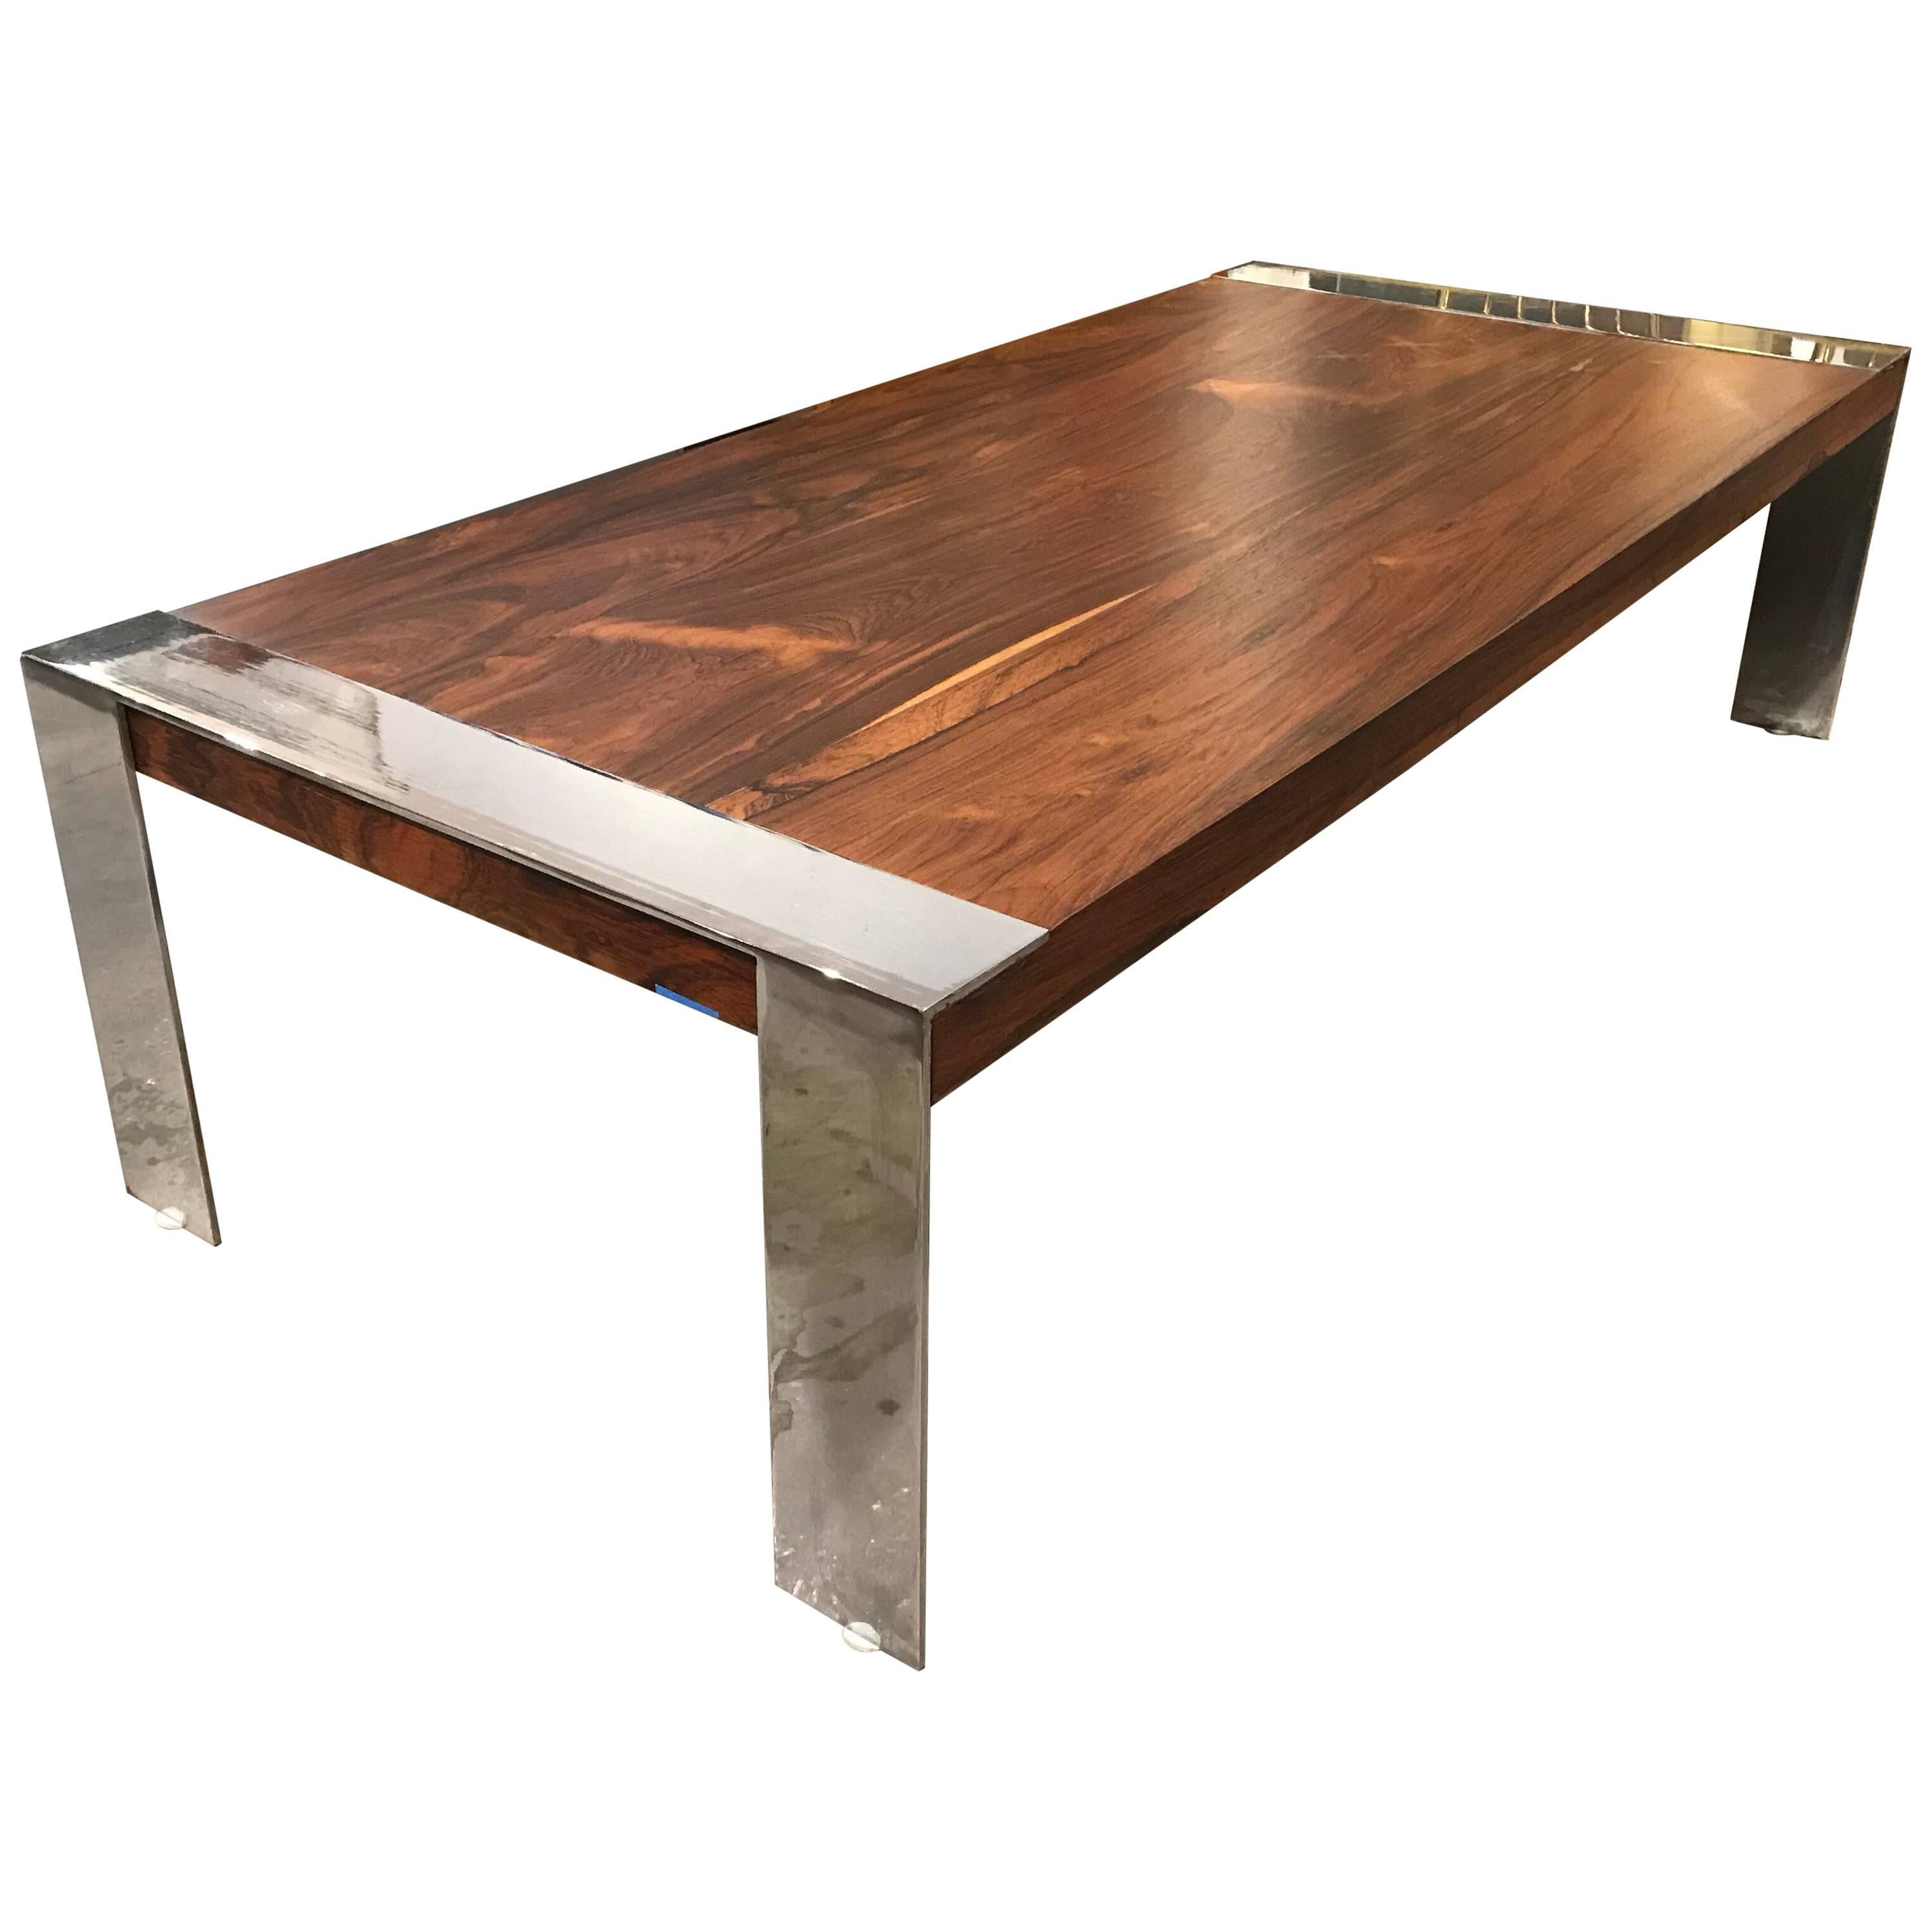 Modern rosewood and chrome rectangular coffee table by Flair, a subsidiary of Bernhardt. Perfect for any modern or mid-mod space. 